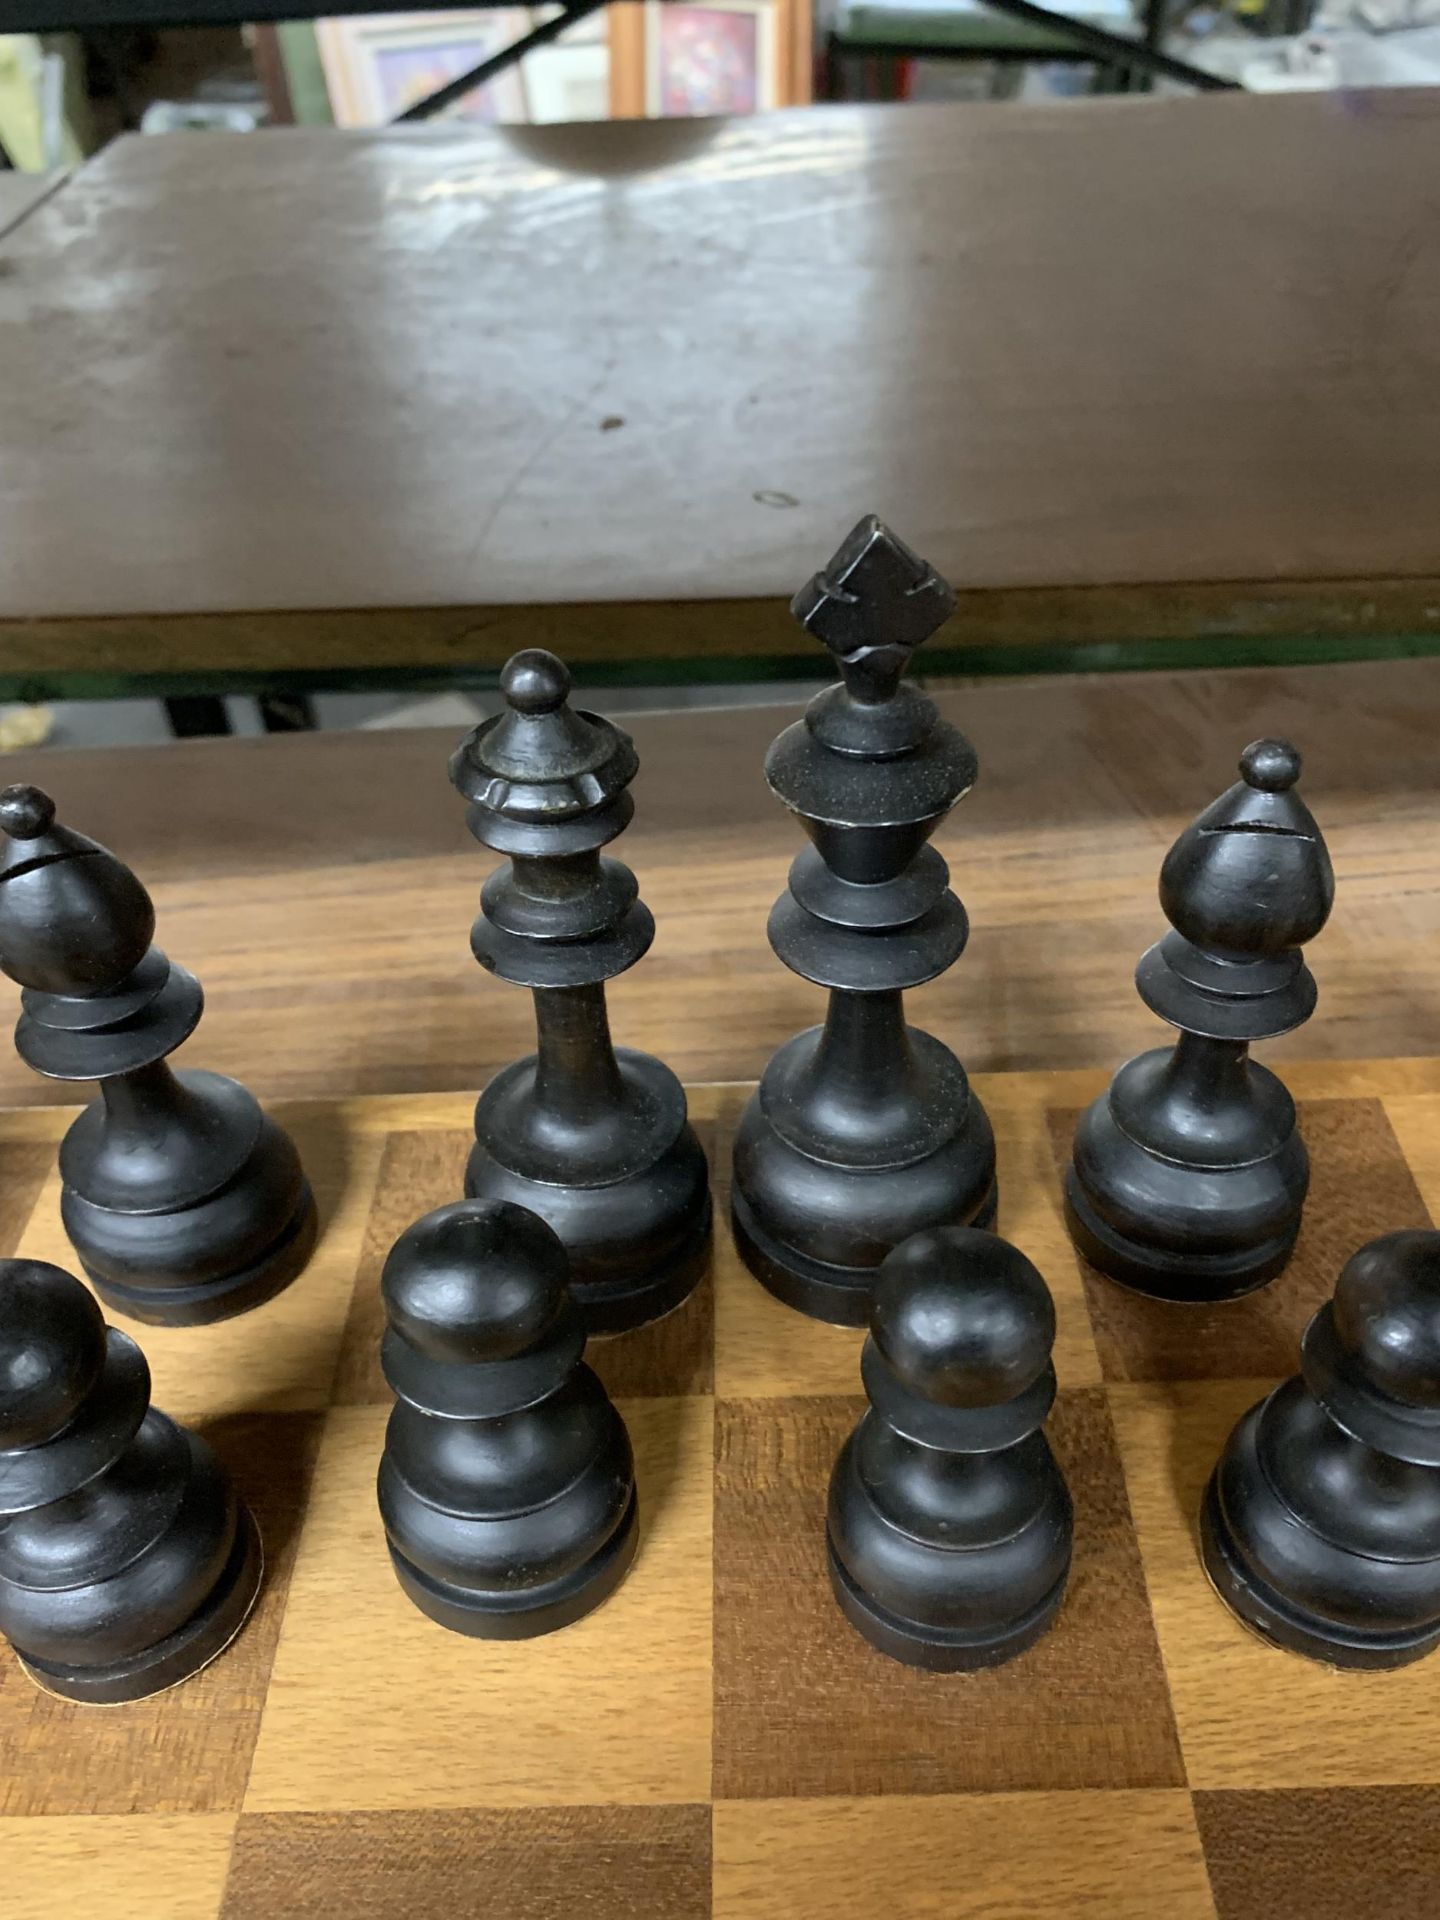 A LARGE WOODEN CHESSBOARD WITH A FULL SET OF WOODEN CHESS PIECES - Image 2 of 4